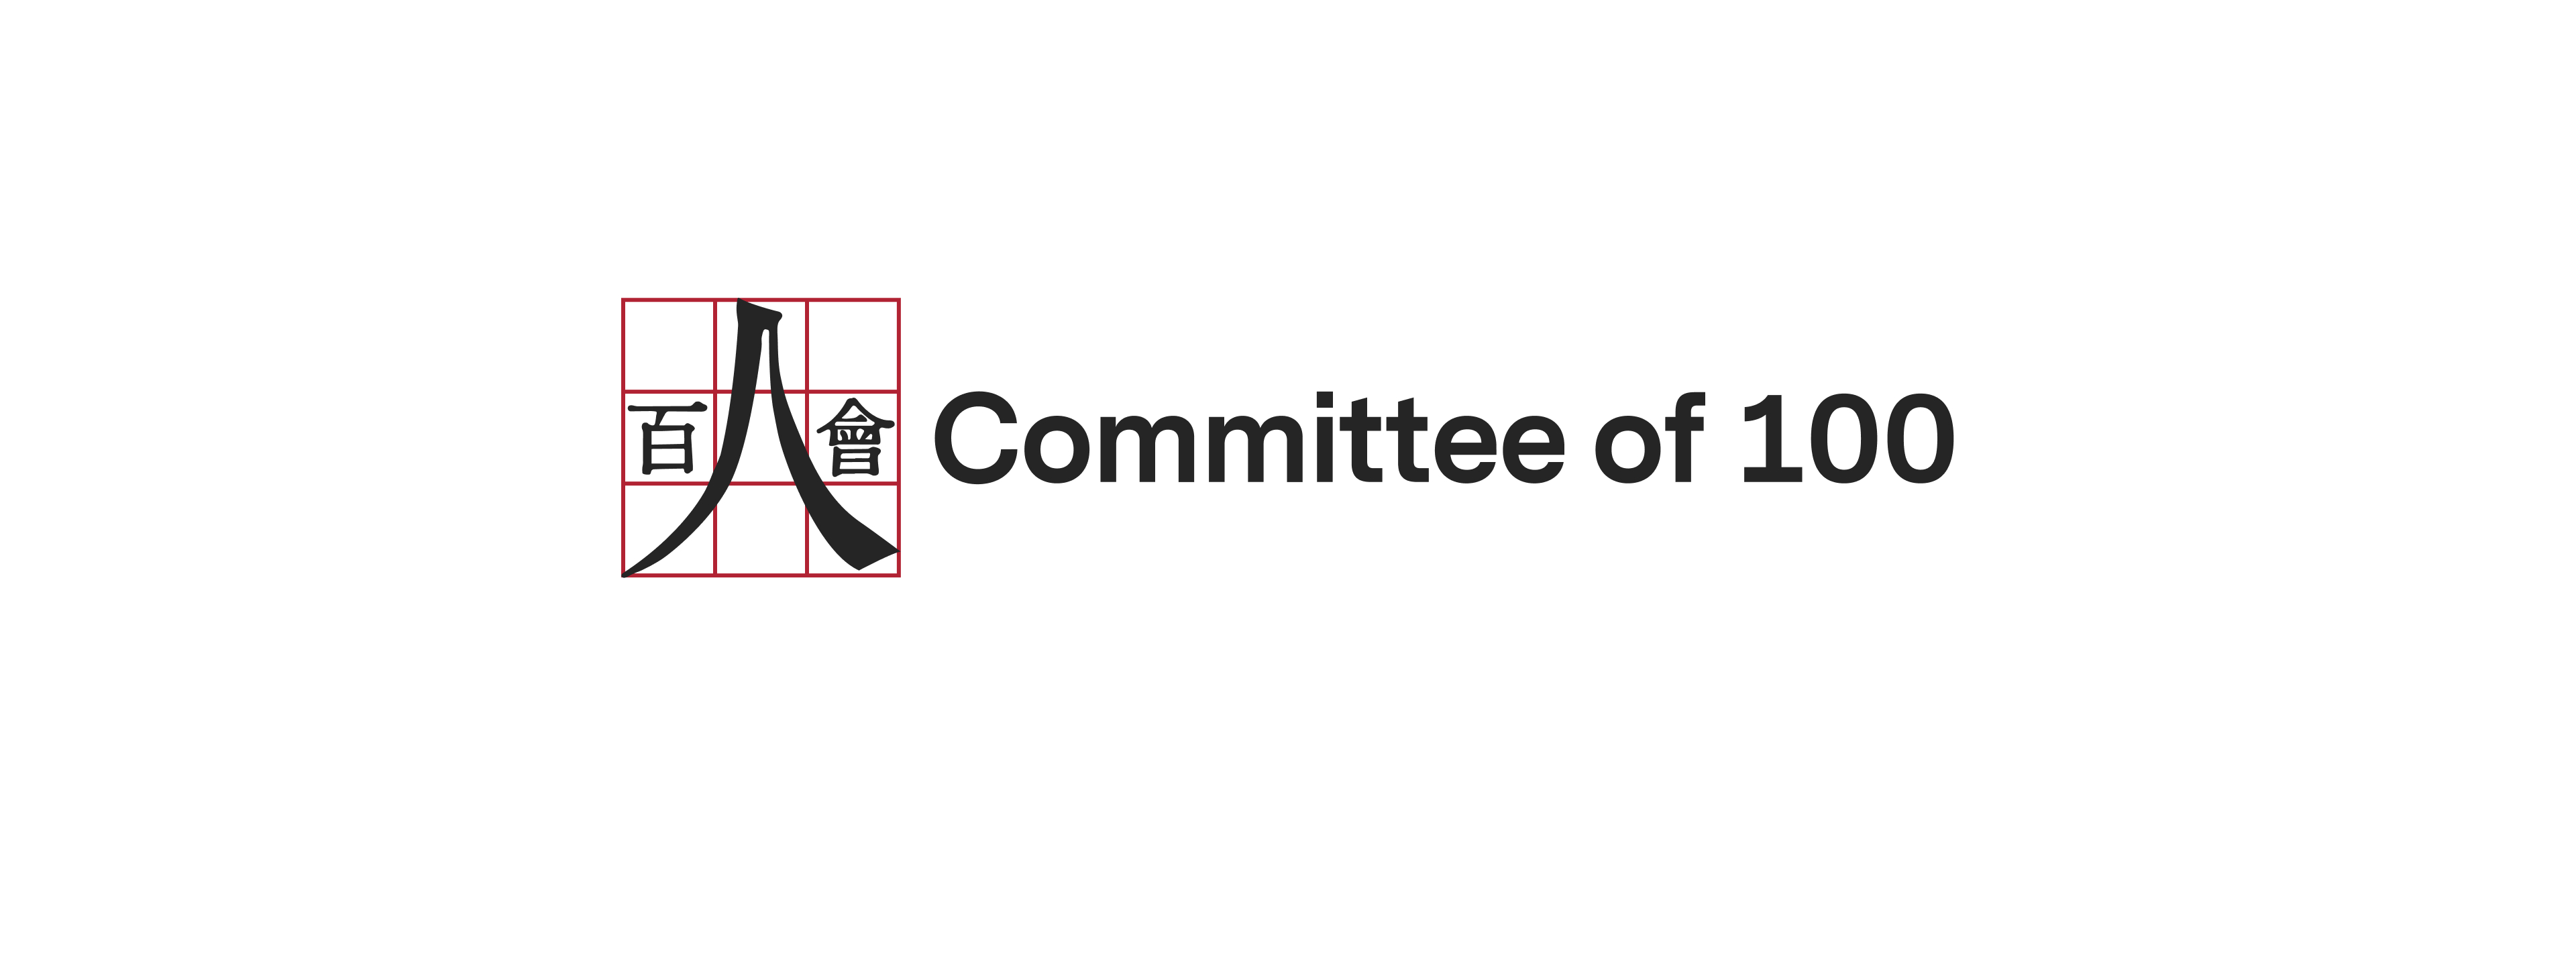 The Committee of 100 Congratulates its Member Ivan K. Fong on His Nomination as General Counsel for the U.S. Department of Homeland Security